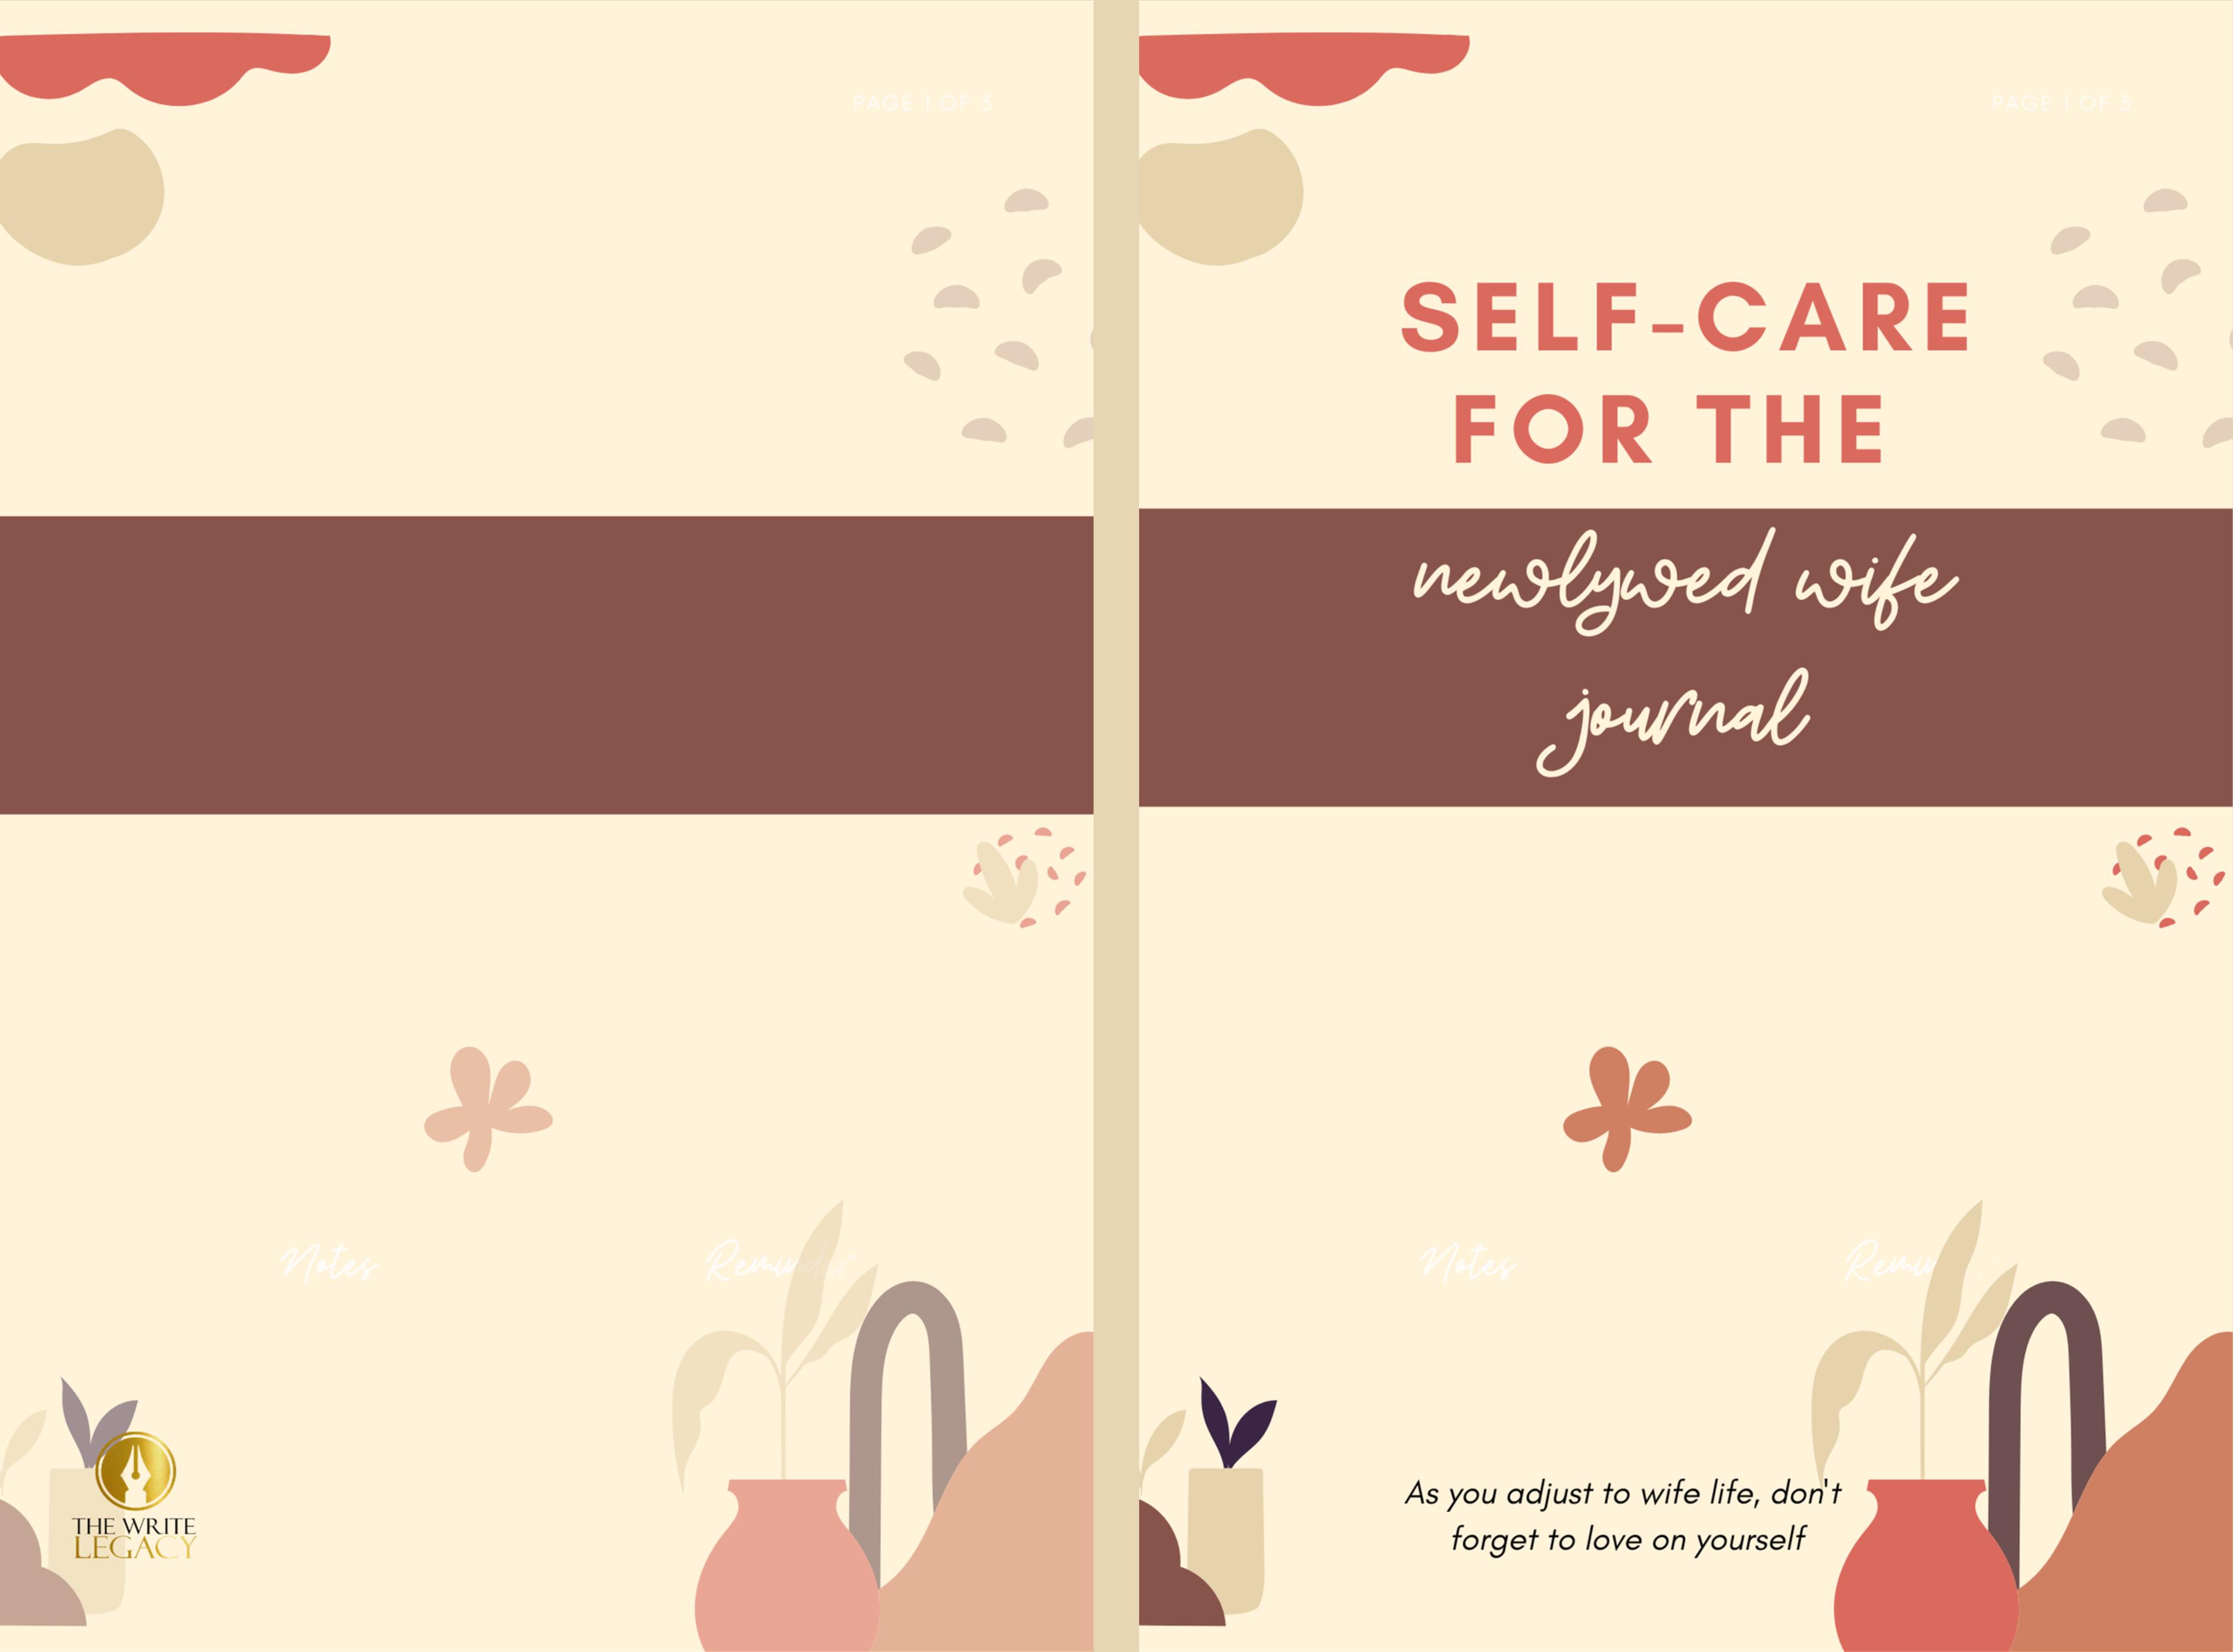 Self-care for the Newlywed Wife Journal cover image